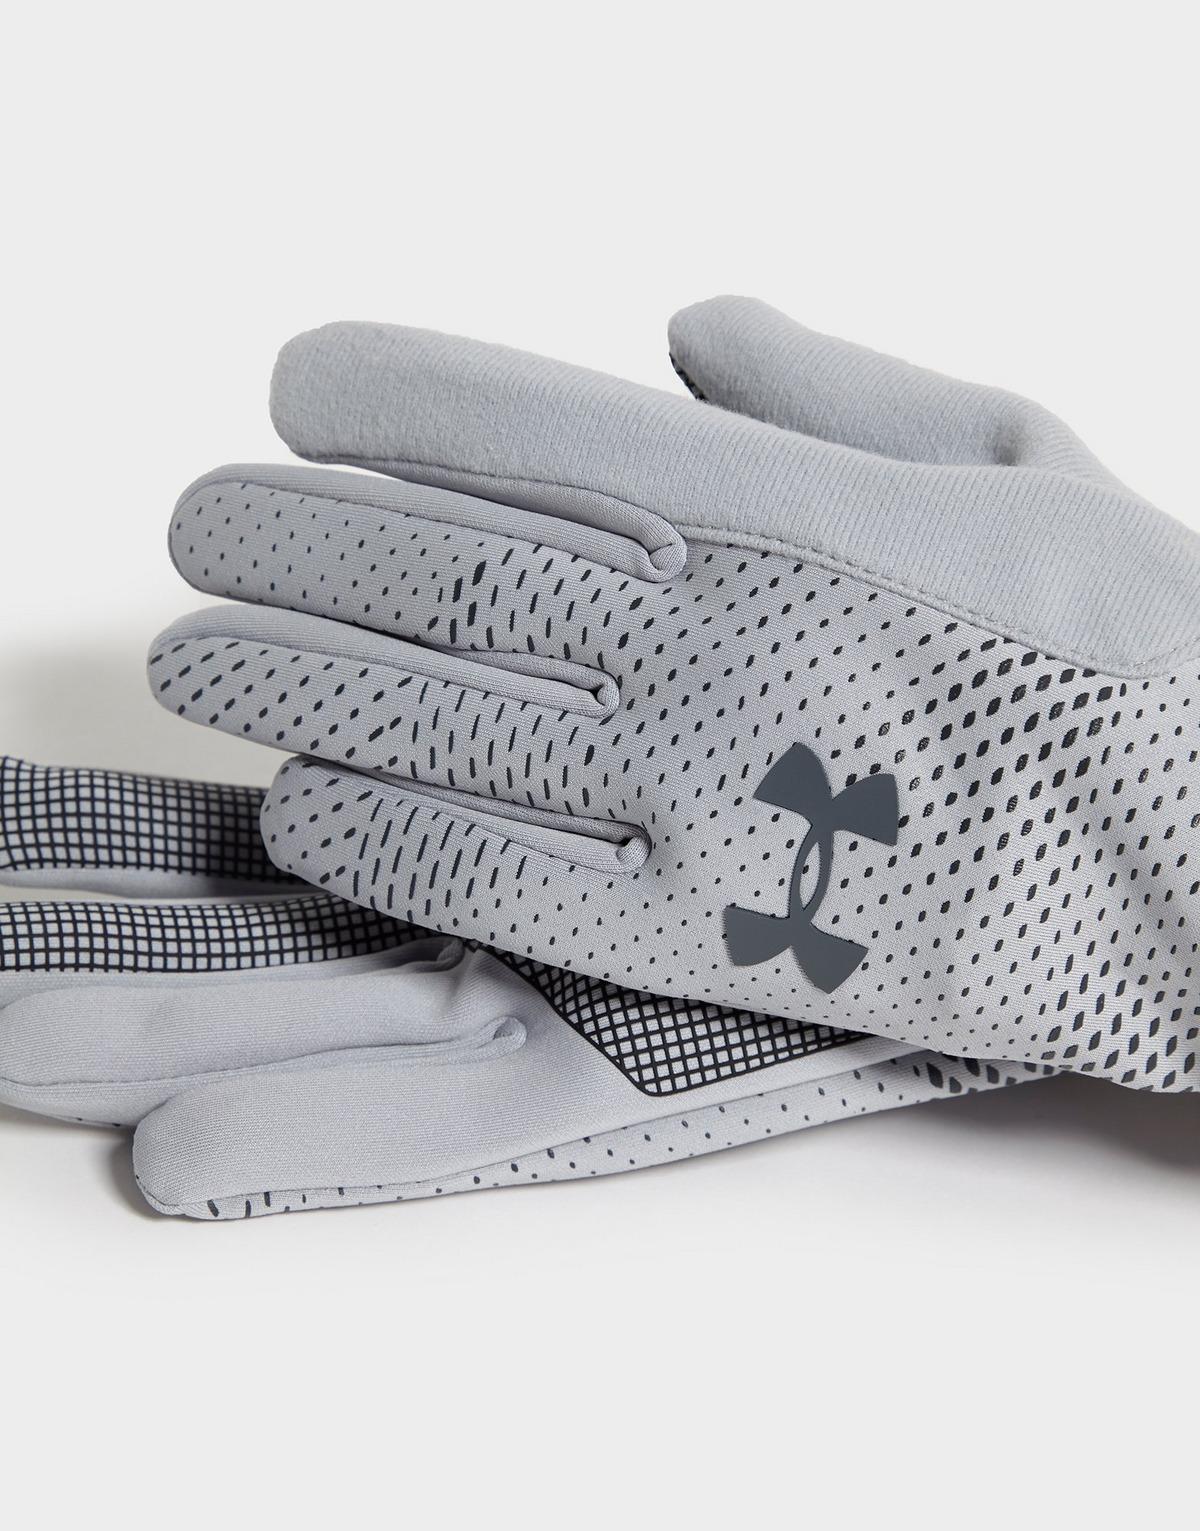 Under Armour Synthetic Etip 2.0 Gloves 